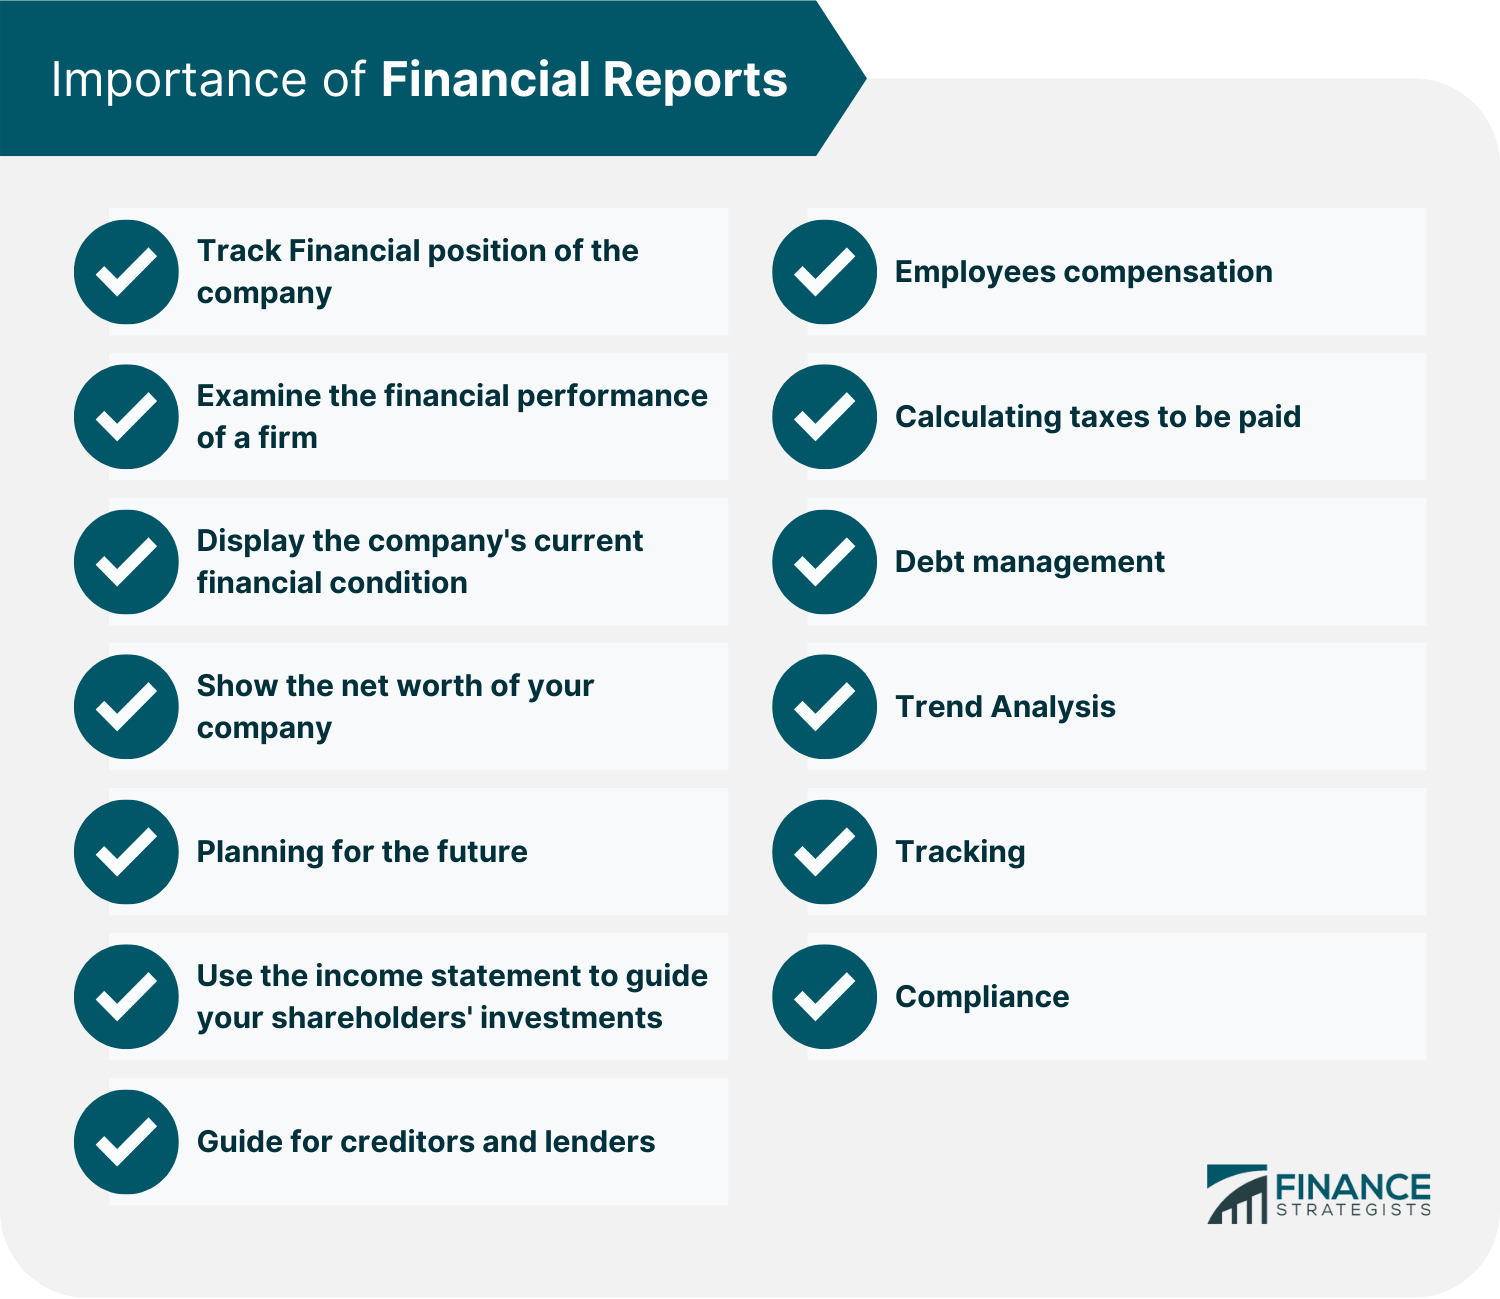 Importance of Financial Reports